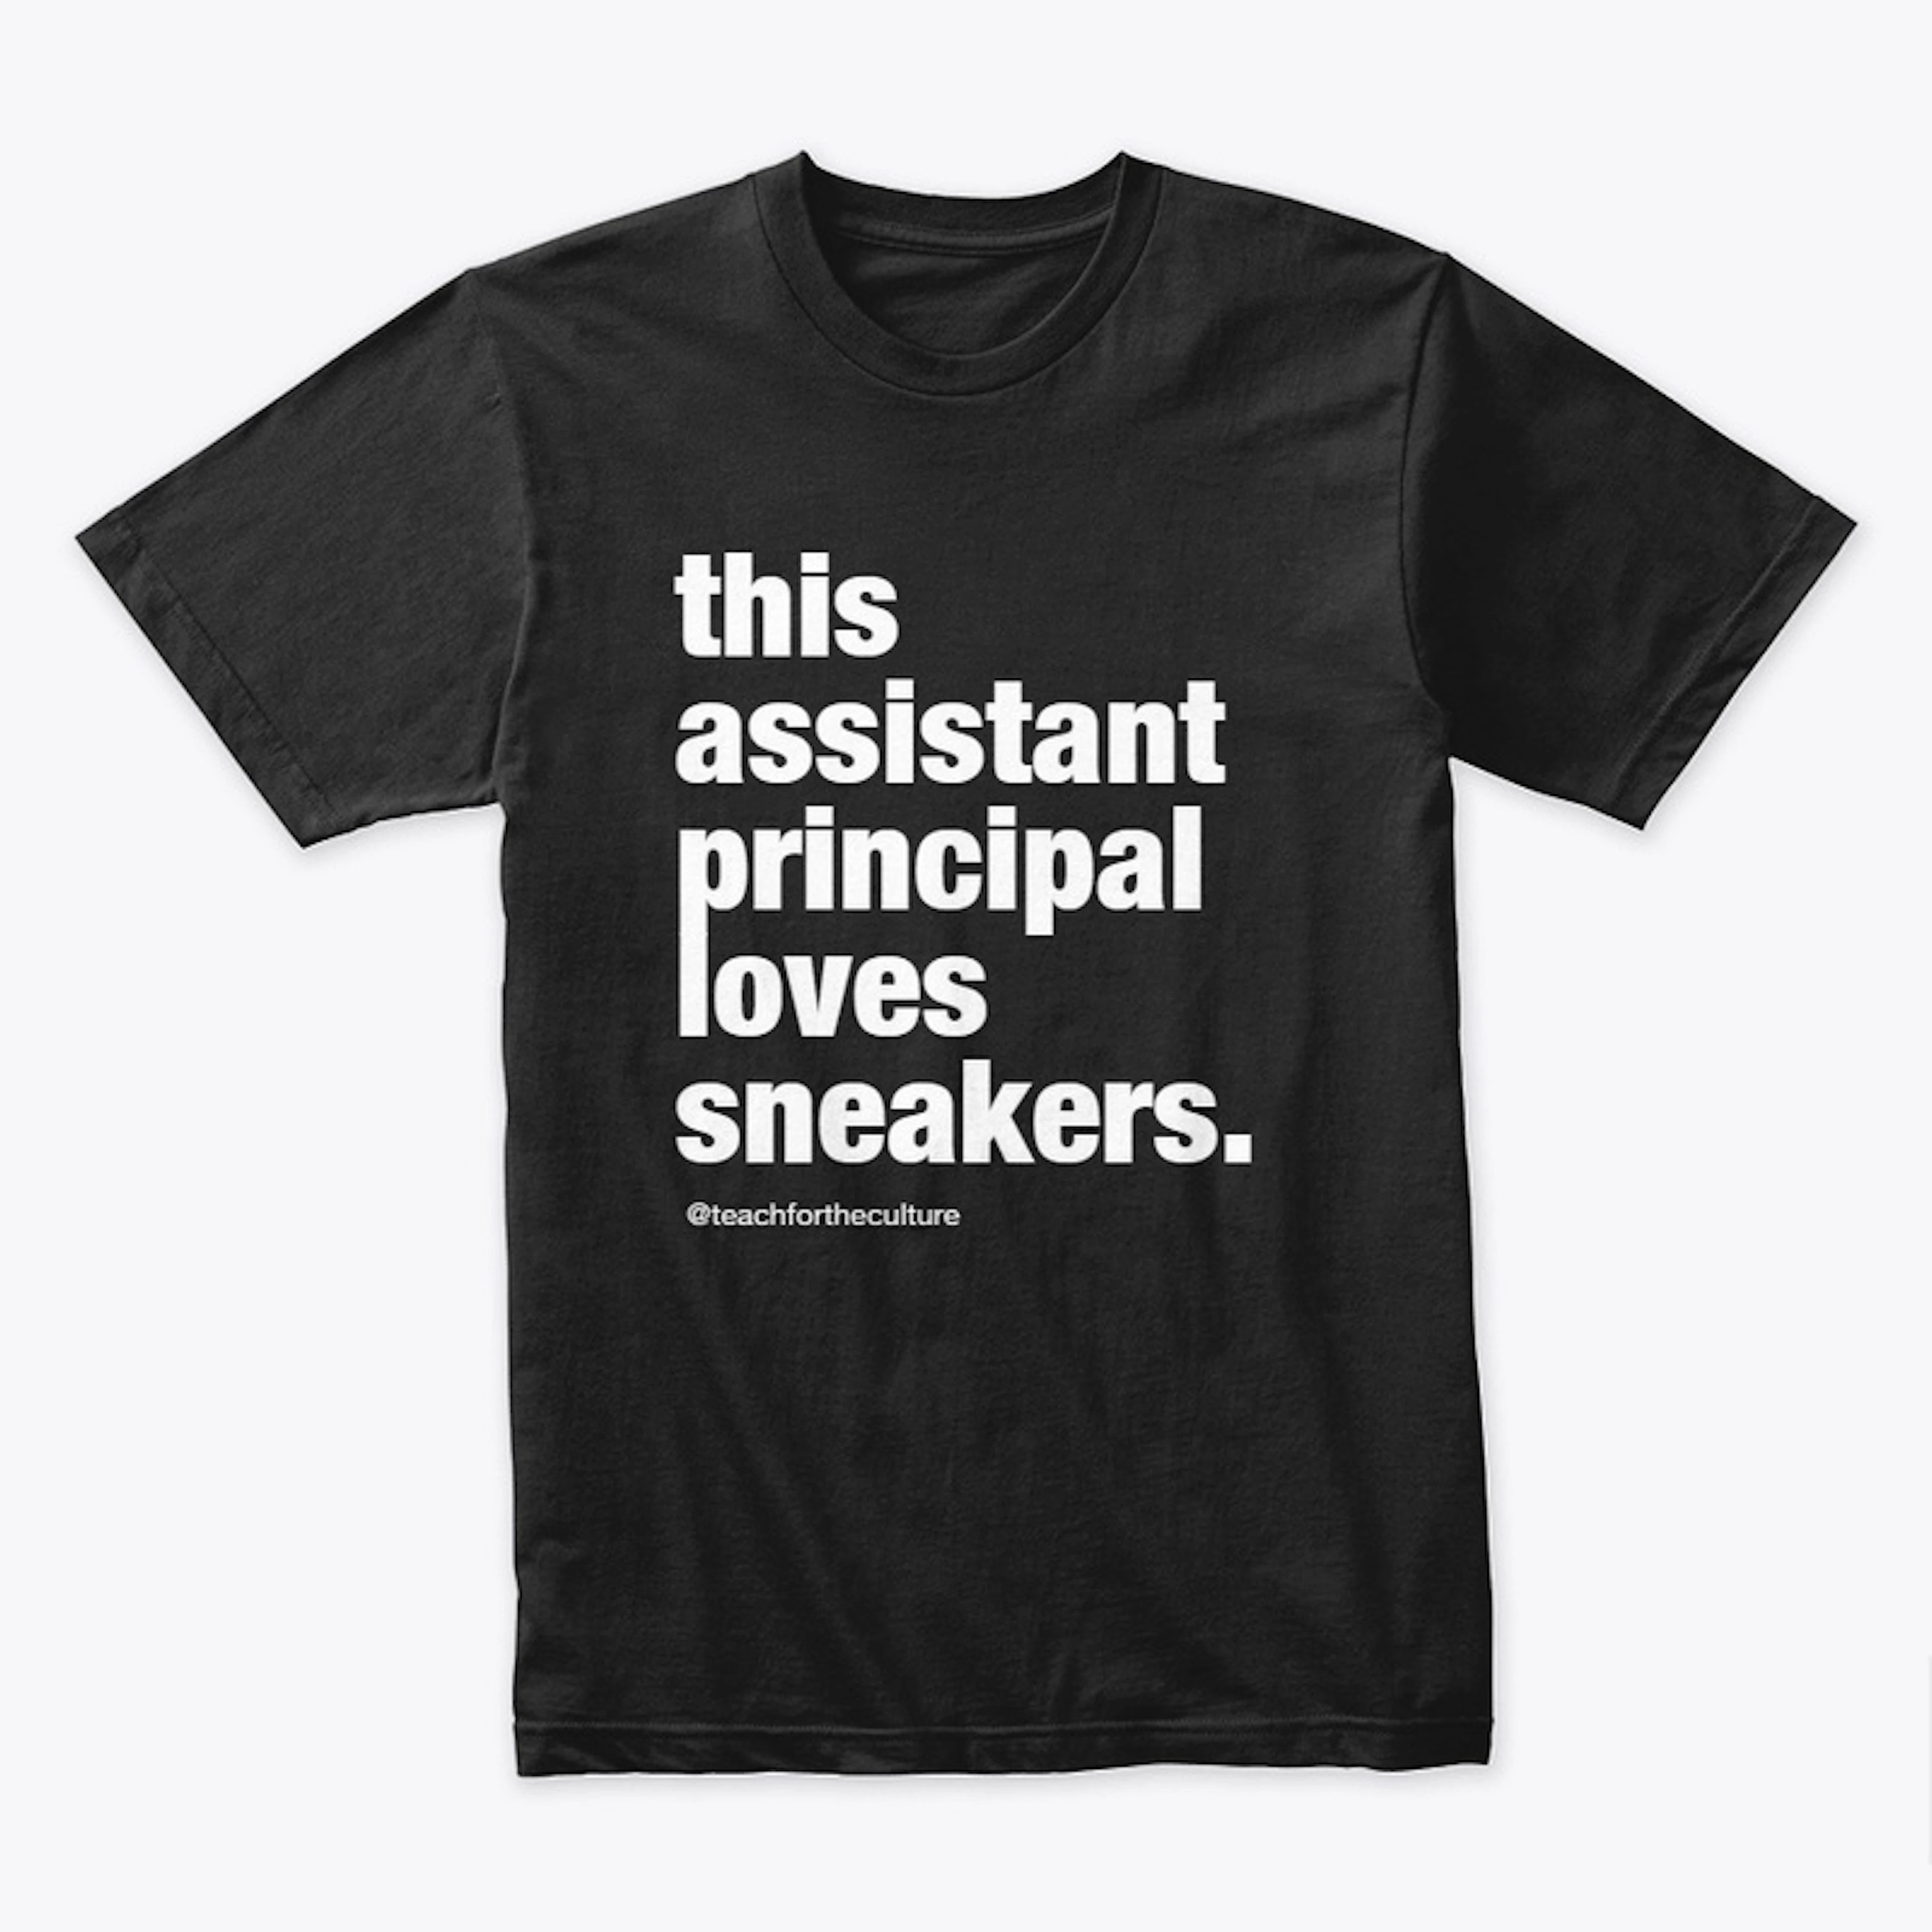 This Assistant Principal loves sneakers